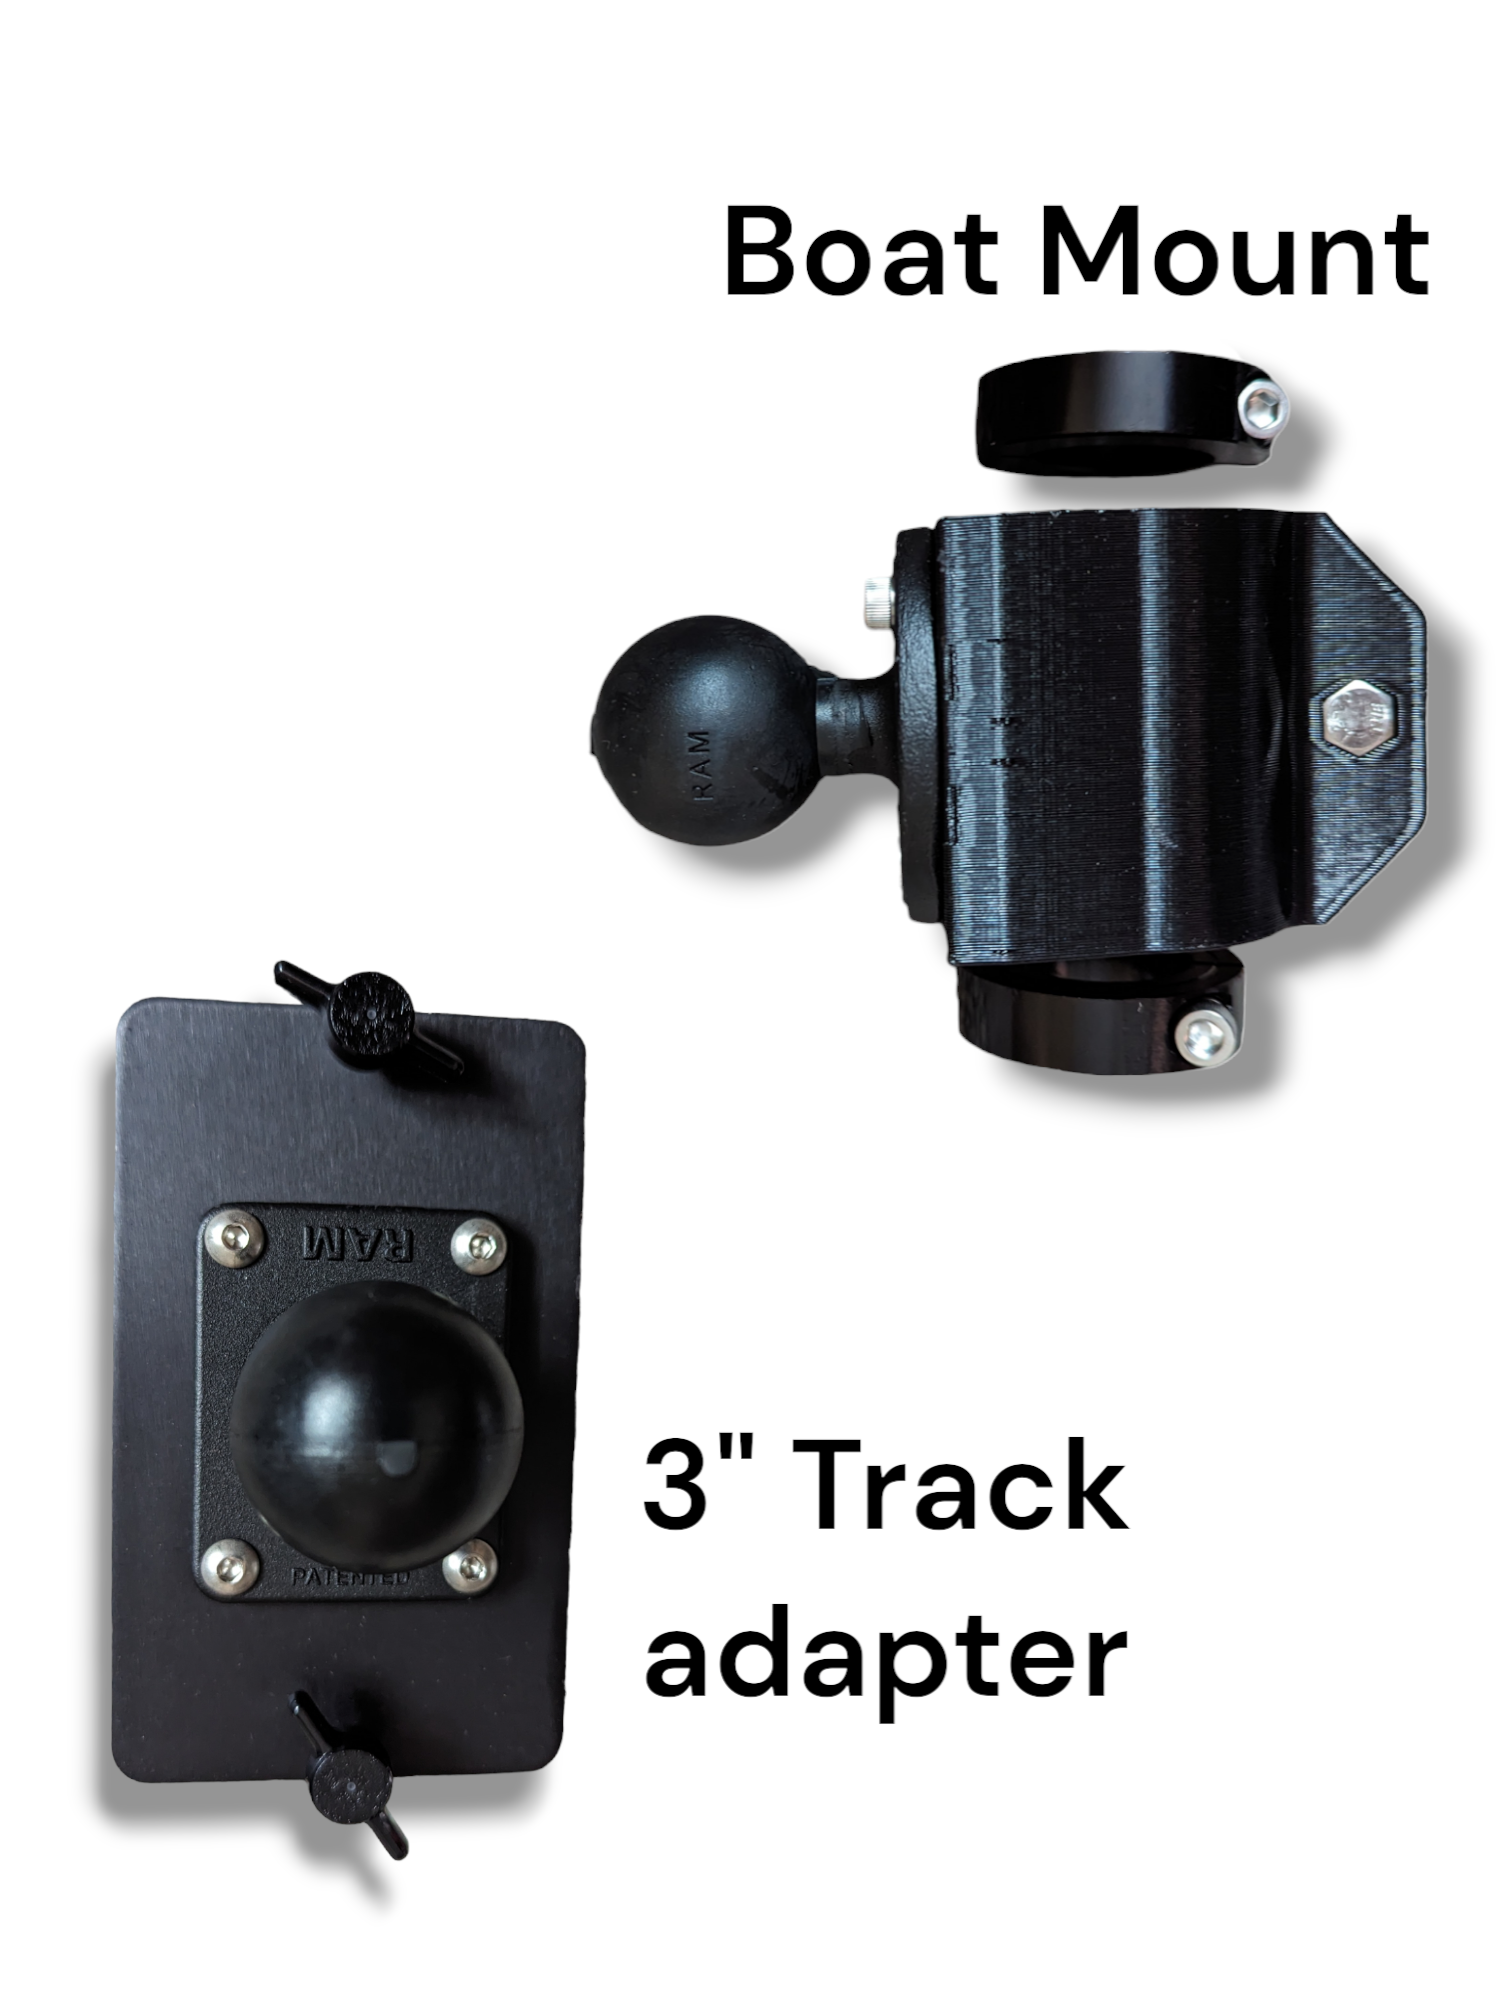 What's the Summer Garmin Livescope Pole mount for Scotty rail